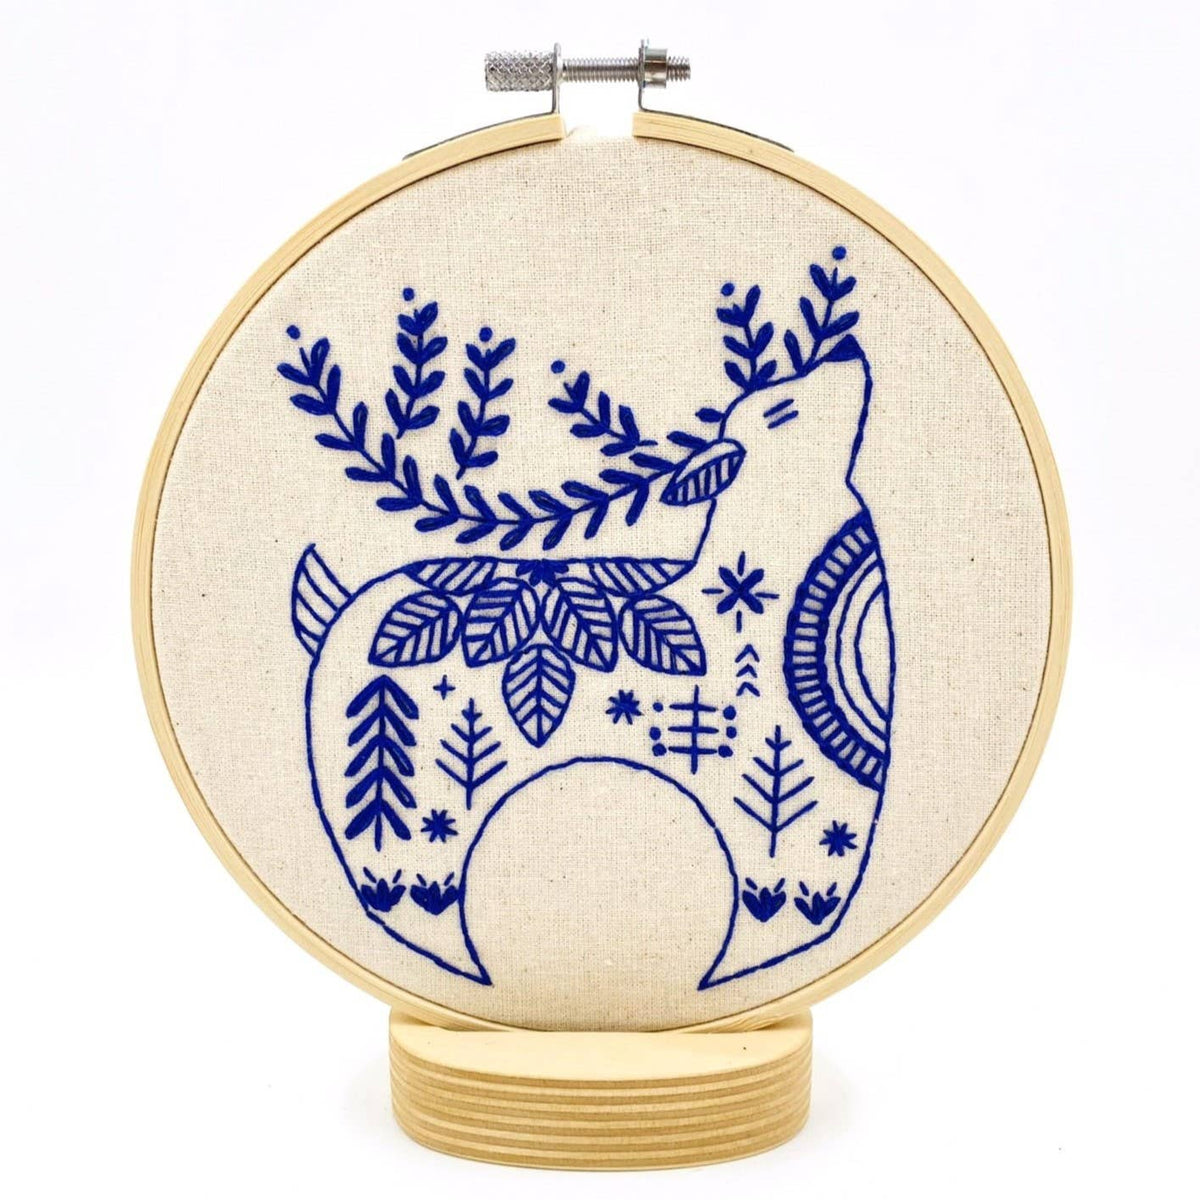 Hook, Line & Tinker Embroidery Kits - Hygge Reindeer Complete Embroidery Kit - Green Ash Decor